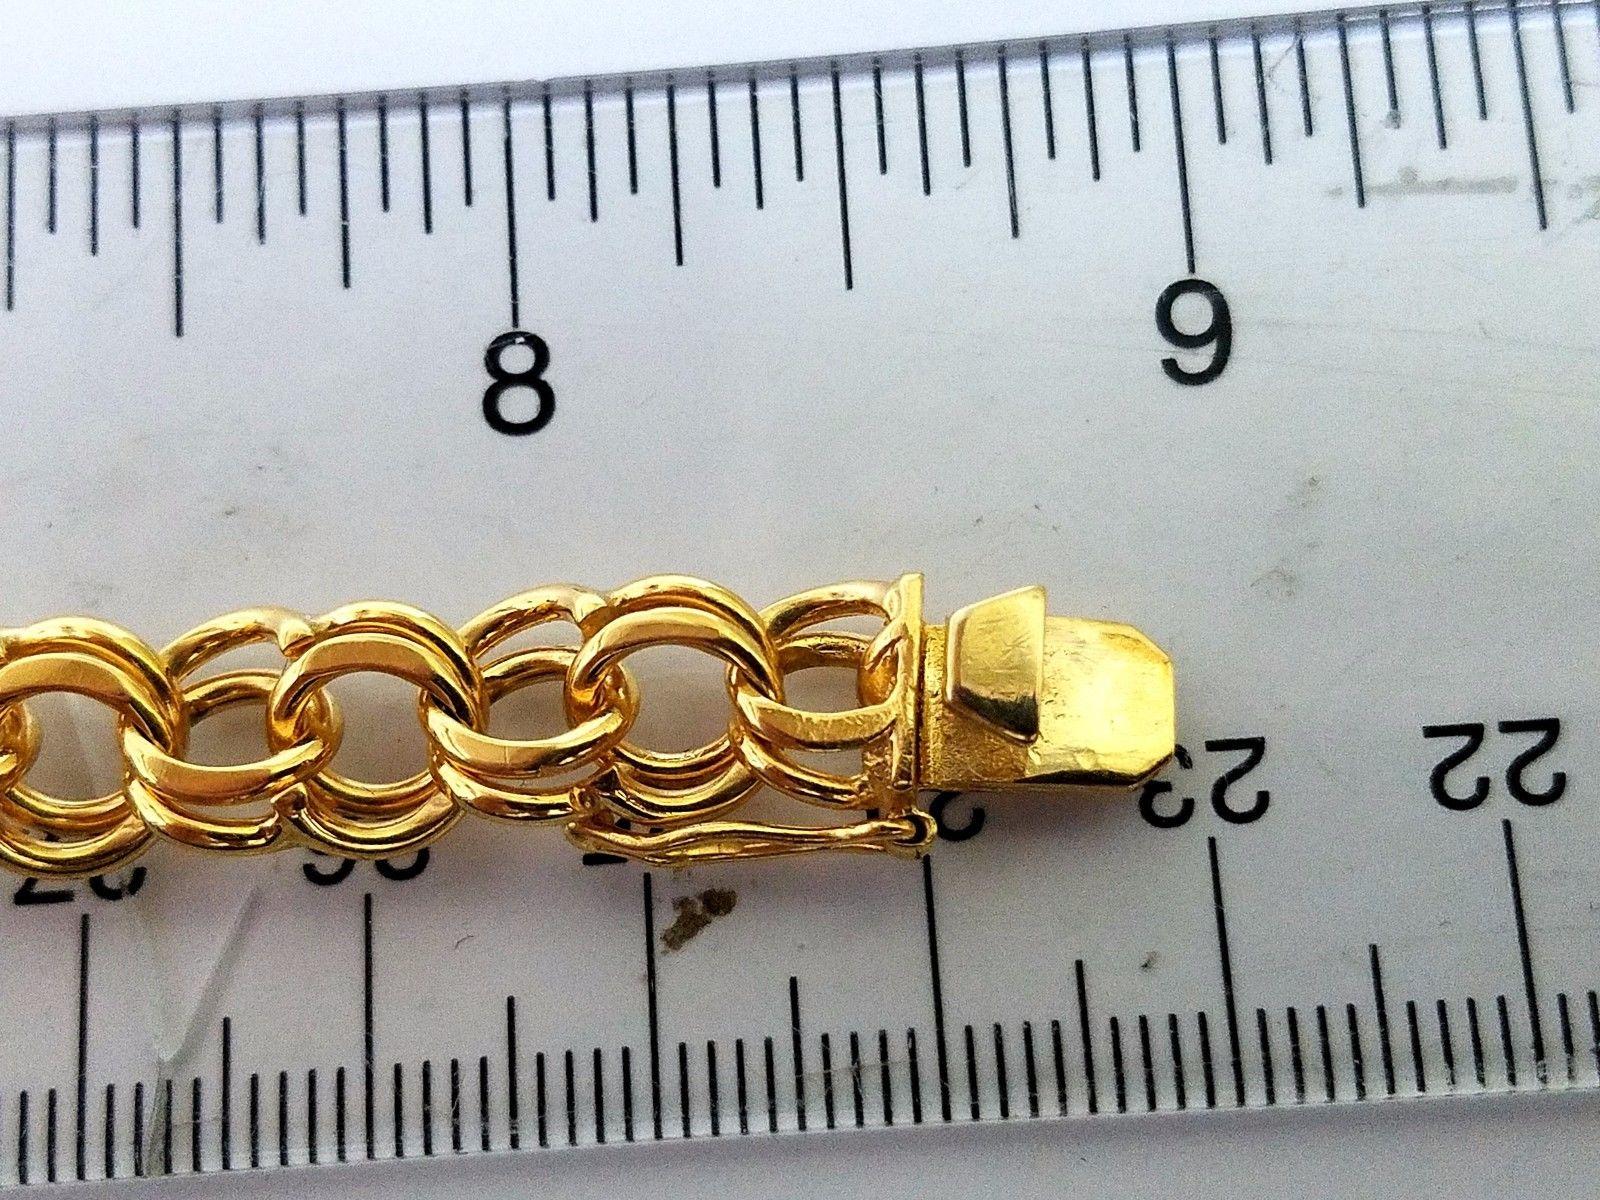 Double Loop Linked Bracelet.

Solid, made for charms support.

14kt. yellow Gold

27 grams

8.5 inches long

9.0mm wide

Very durable and substantial weight

nice sized lock